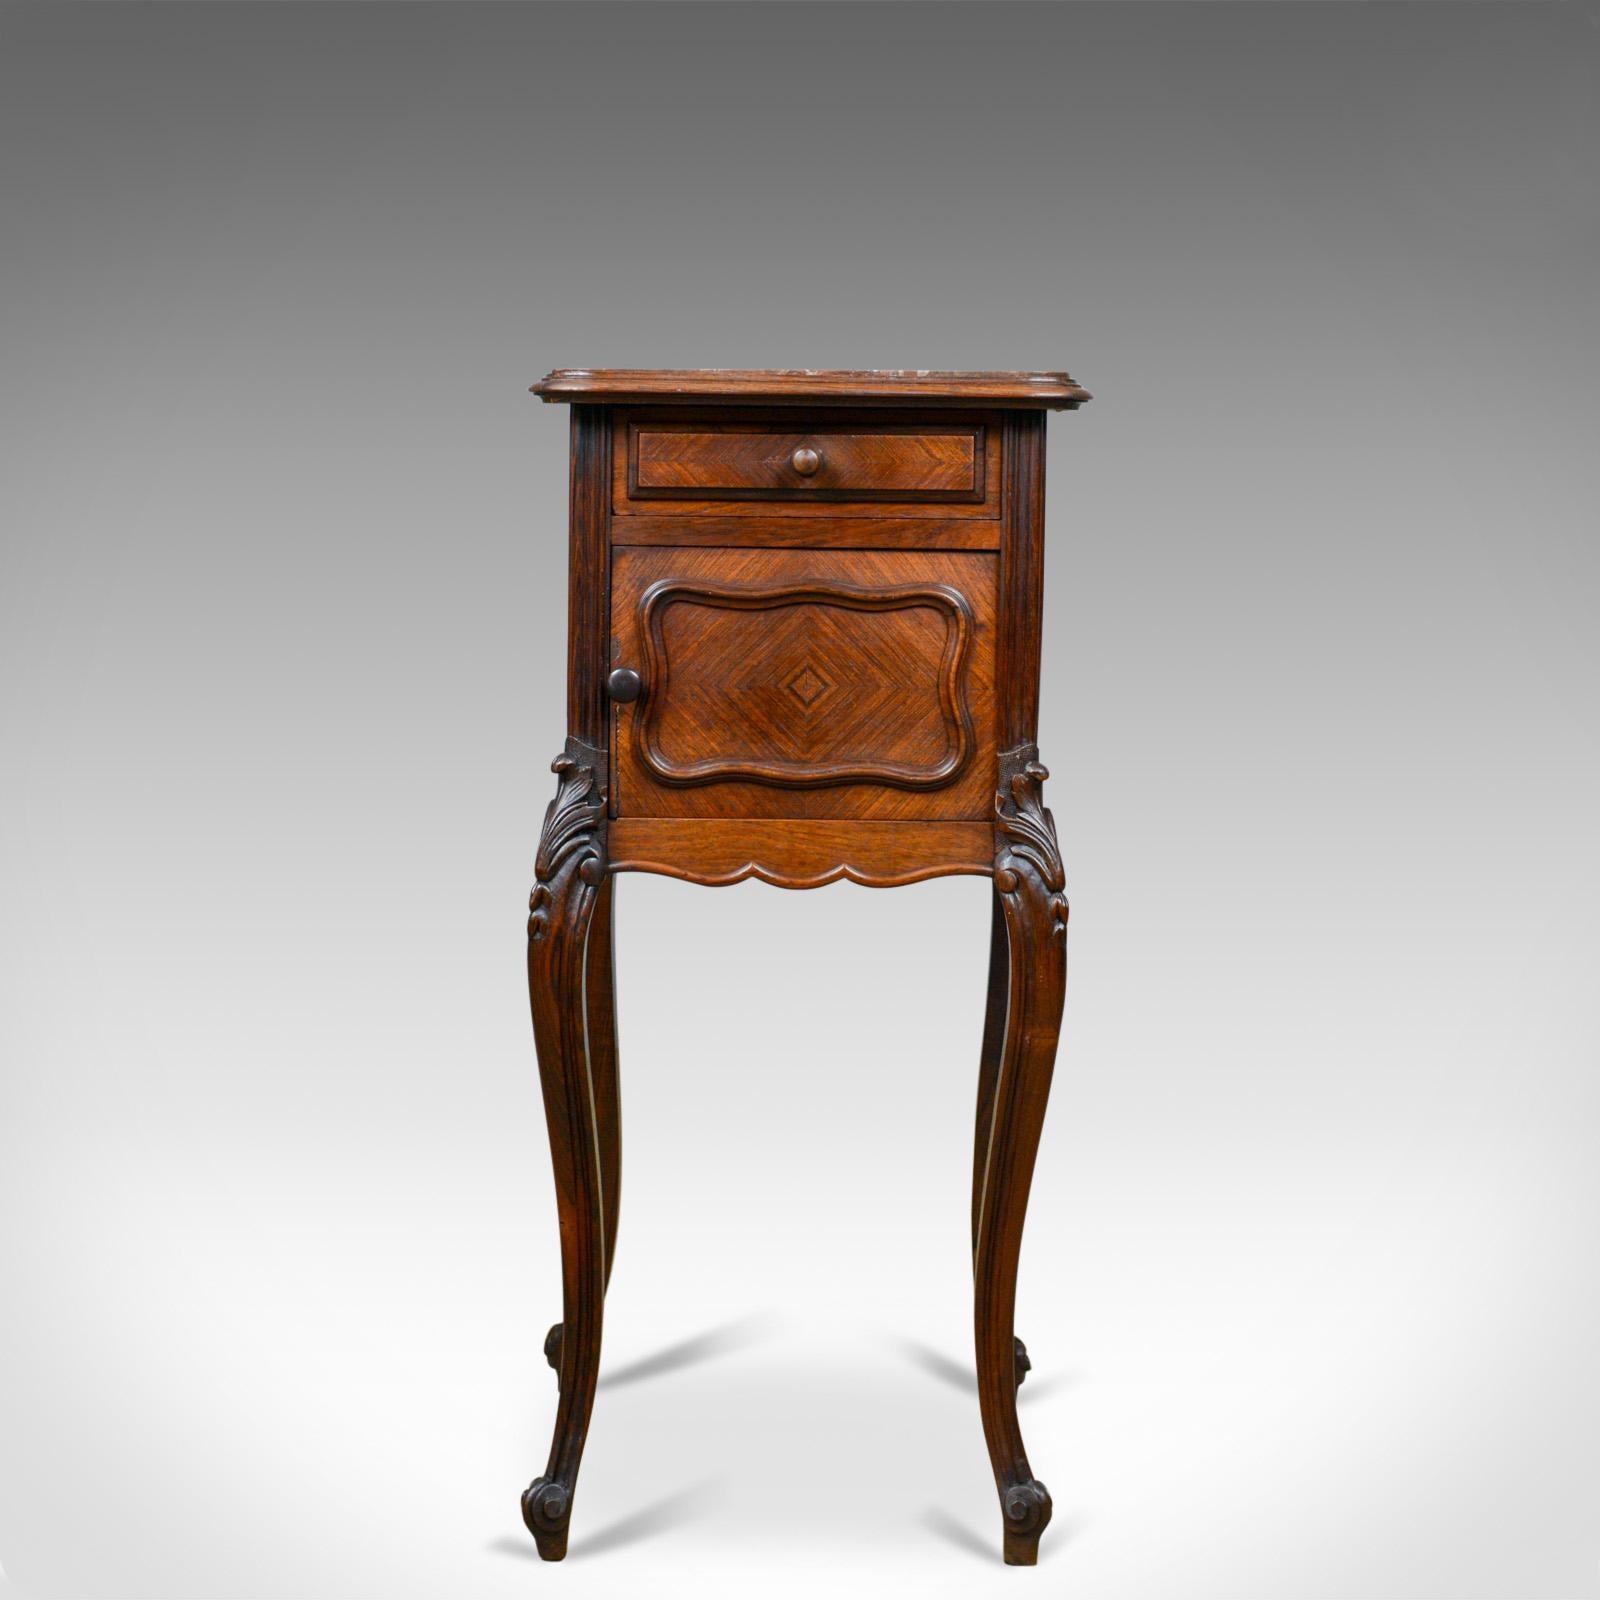 This is a French antique bedside cabinet. A Victorian, walnut, marble top, pot cupboard dating to the late 19th century, circa 1880.

Superior quality, in good proportion and of quality craftsmanship
Attractive tones to the walnut with a mellow